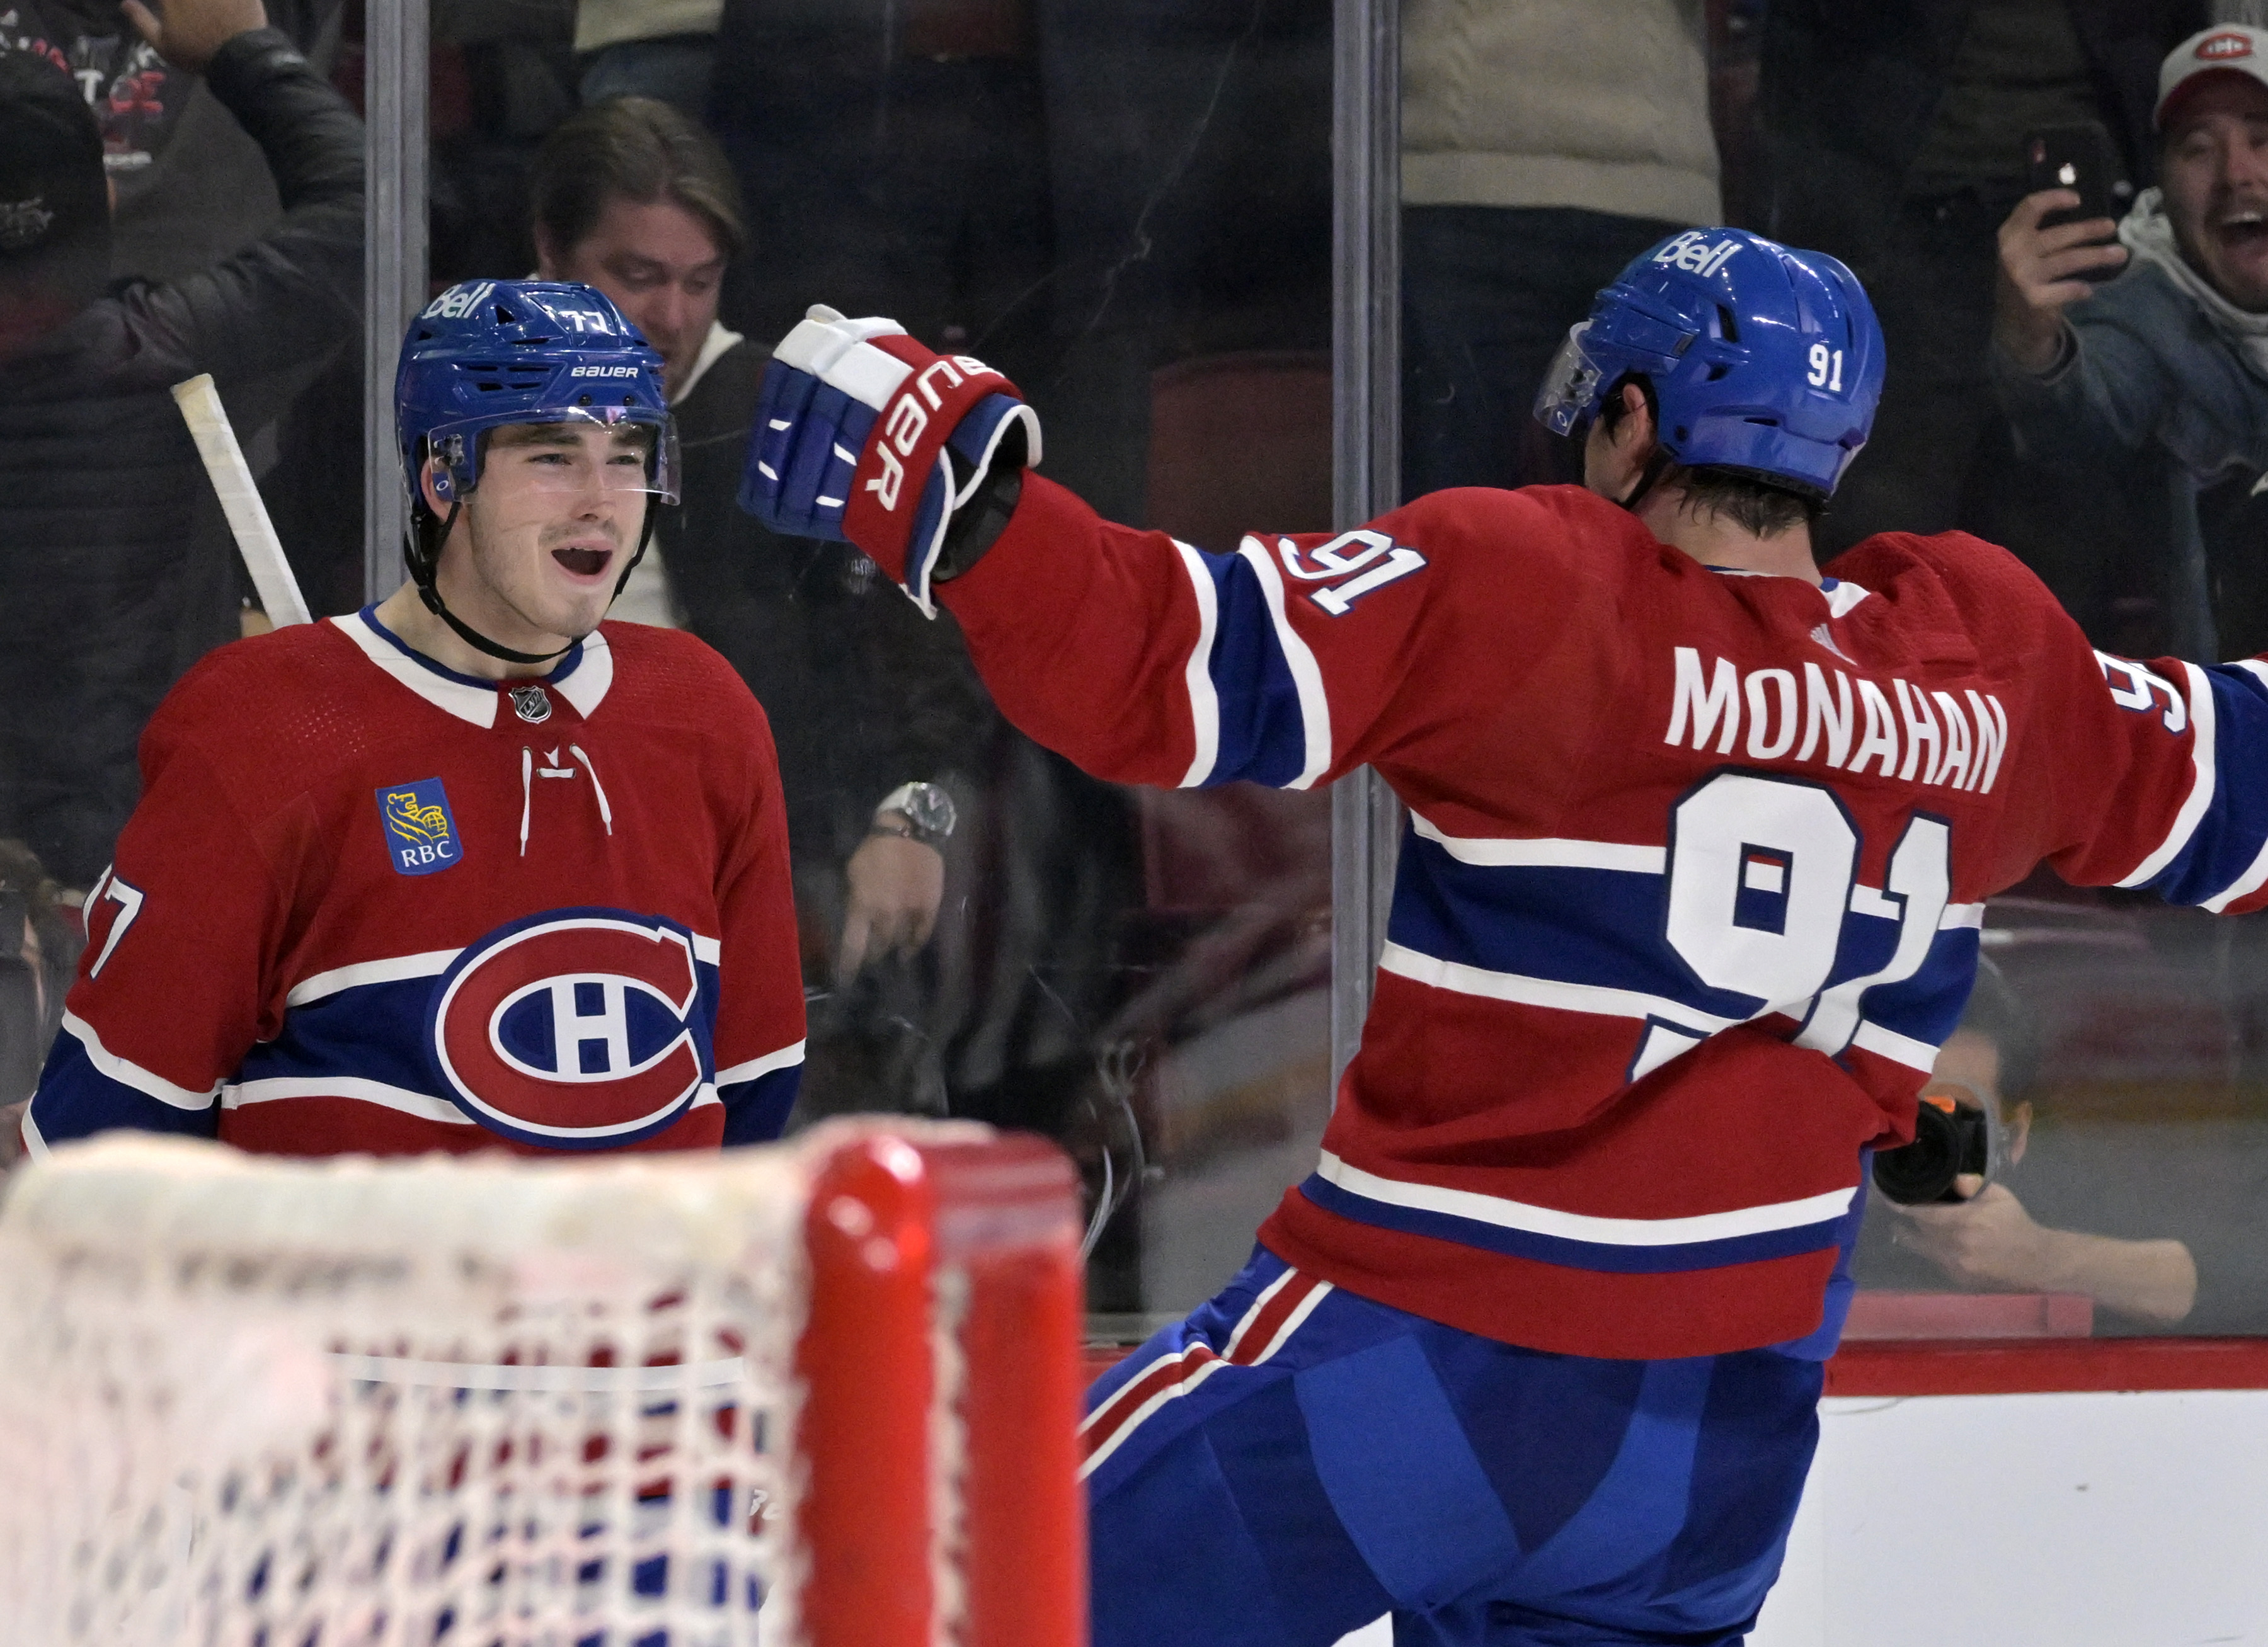 What the Puck: RBC logo on Canadiens jersey has some fans seeing red